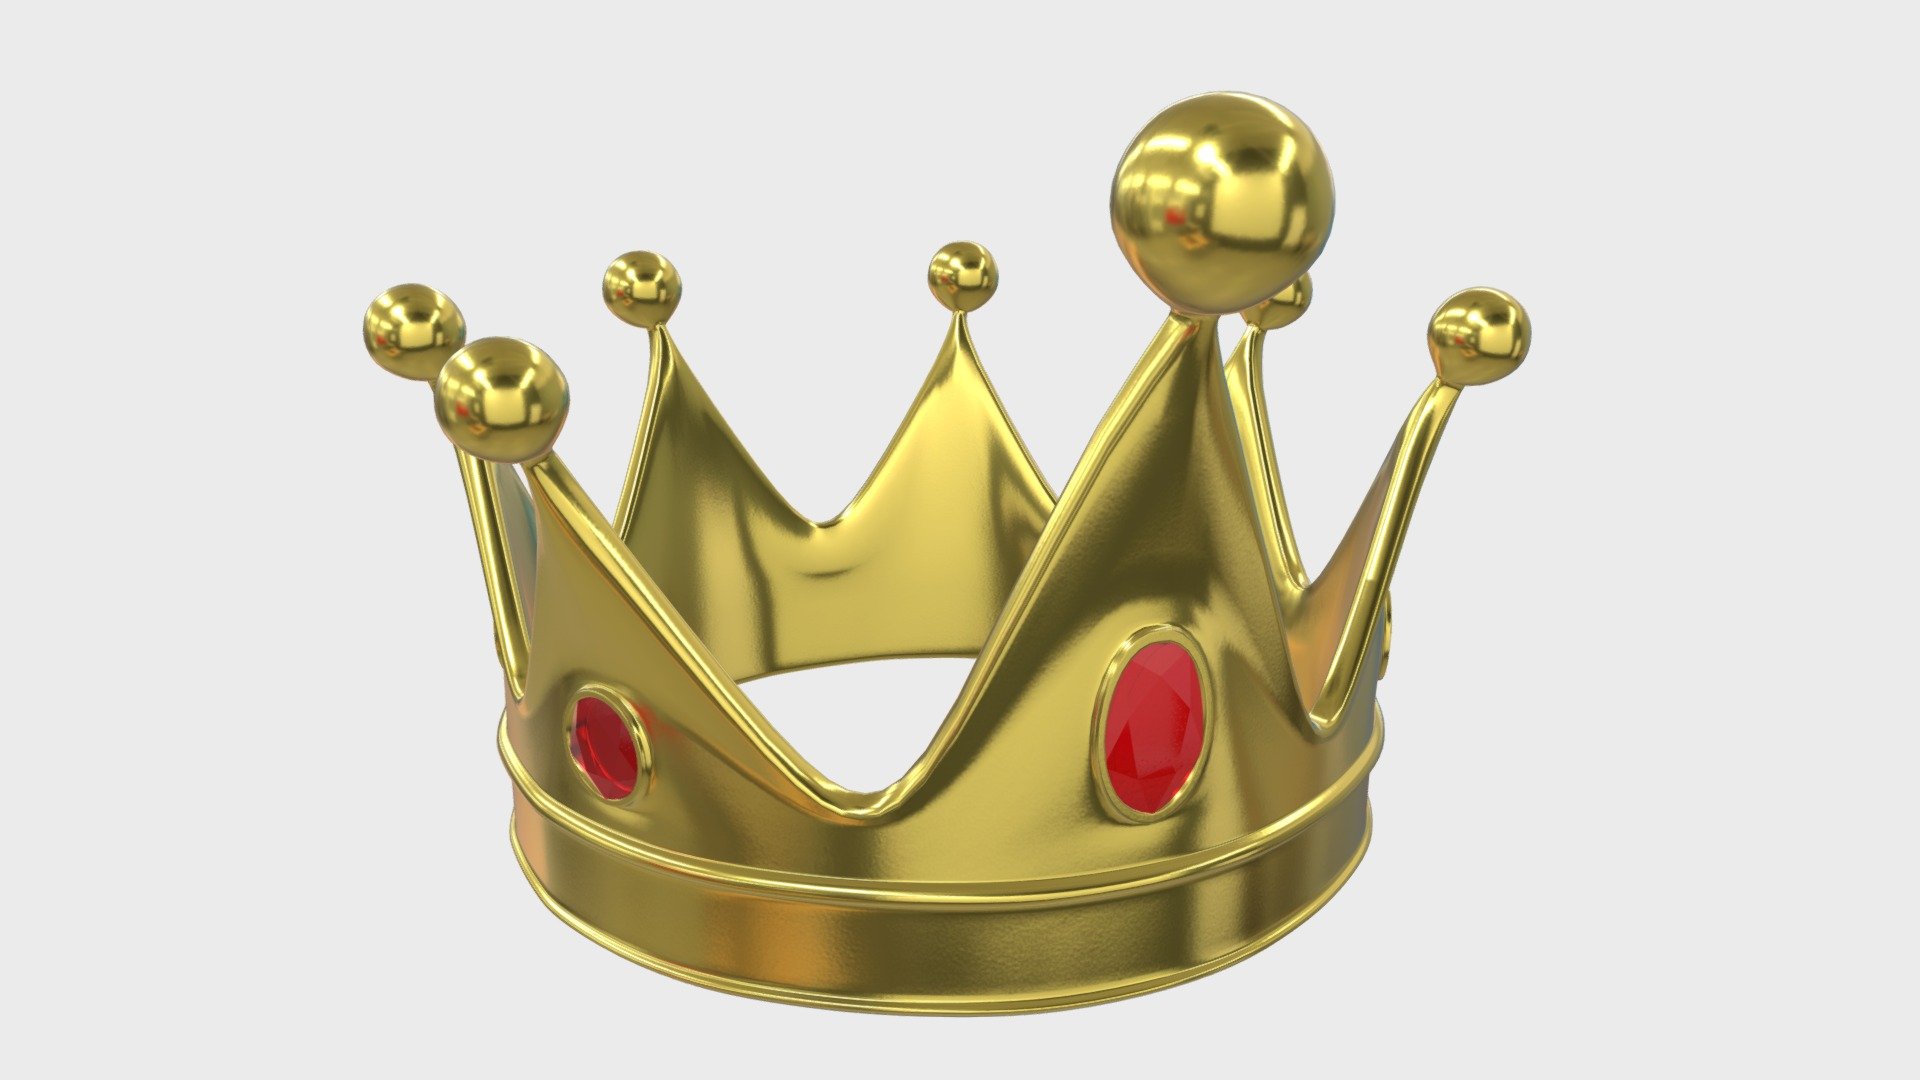 === The following description refers to the additional ZIP package provided with this model ===

Gold crown 3D Model, nr. 14 in my collection. 2 objects (crown frame, gems), each one with its own non overlapping UV Layout map, Material and PBR Textures set. Production-ready 3D Model, with PBR materials, textures, non overlapping UV Layout map provided in the package.

Quads only geometries (no tris/ngons).

Formats included: FBX, OBJ; scenes: BLEND (with Cycles / Eevee PBR Materials and Textures); other: png with Alpha.

2 Objects (meshes), 2 PBR Materials, UV unwrapped (non overlapping UV Layout map provided in the package); UV-mapped Textures.

UV Layout maps and Image Textures resolutions: 2048x2048; PBR Textures made with Substance Painter.

Polygonal, QUADS ONLY (no tris/ngons); 25690 vertices, 25676 quad faces (51352 tris).

Real world dimensions; scene scale units: cm in Blender 3.1 (that is: Metric with 0.01 scale).

Uniform scale object (scale applied in Blender 3.1) 3d model